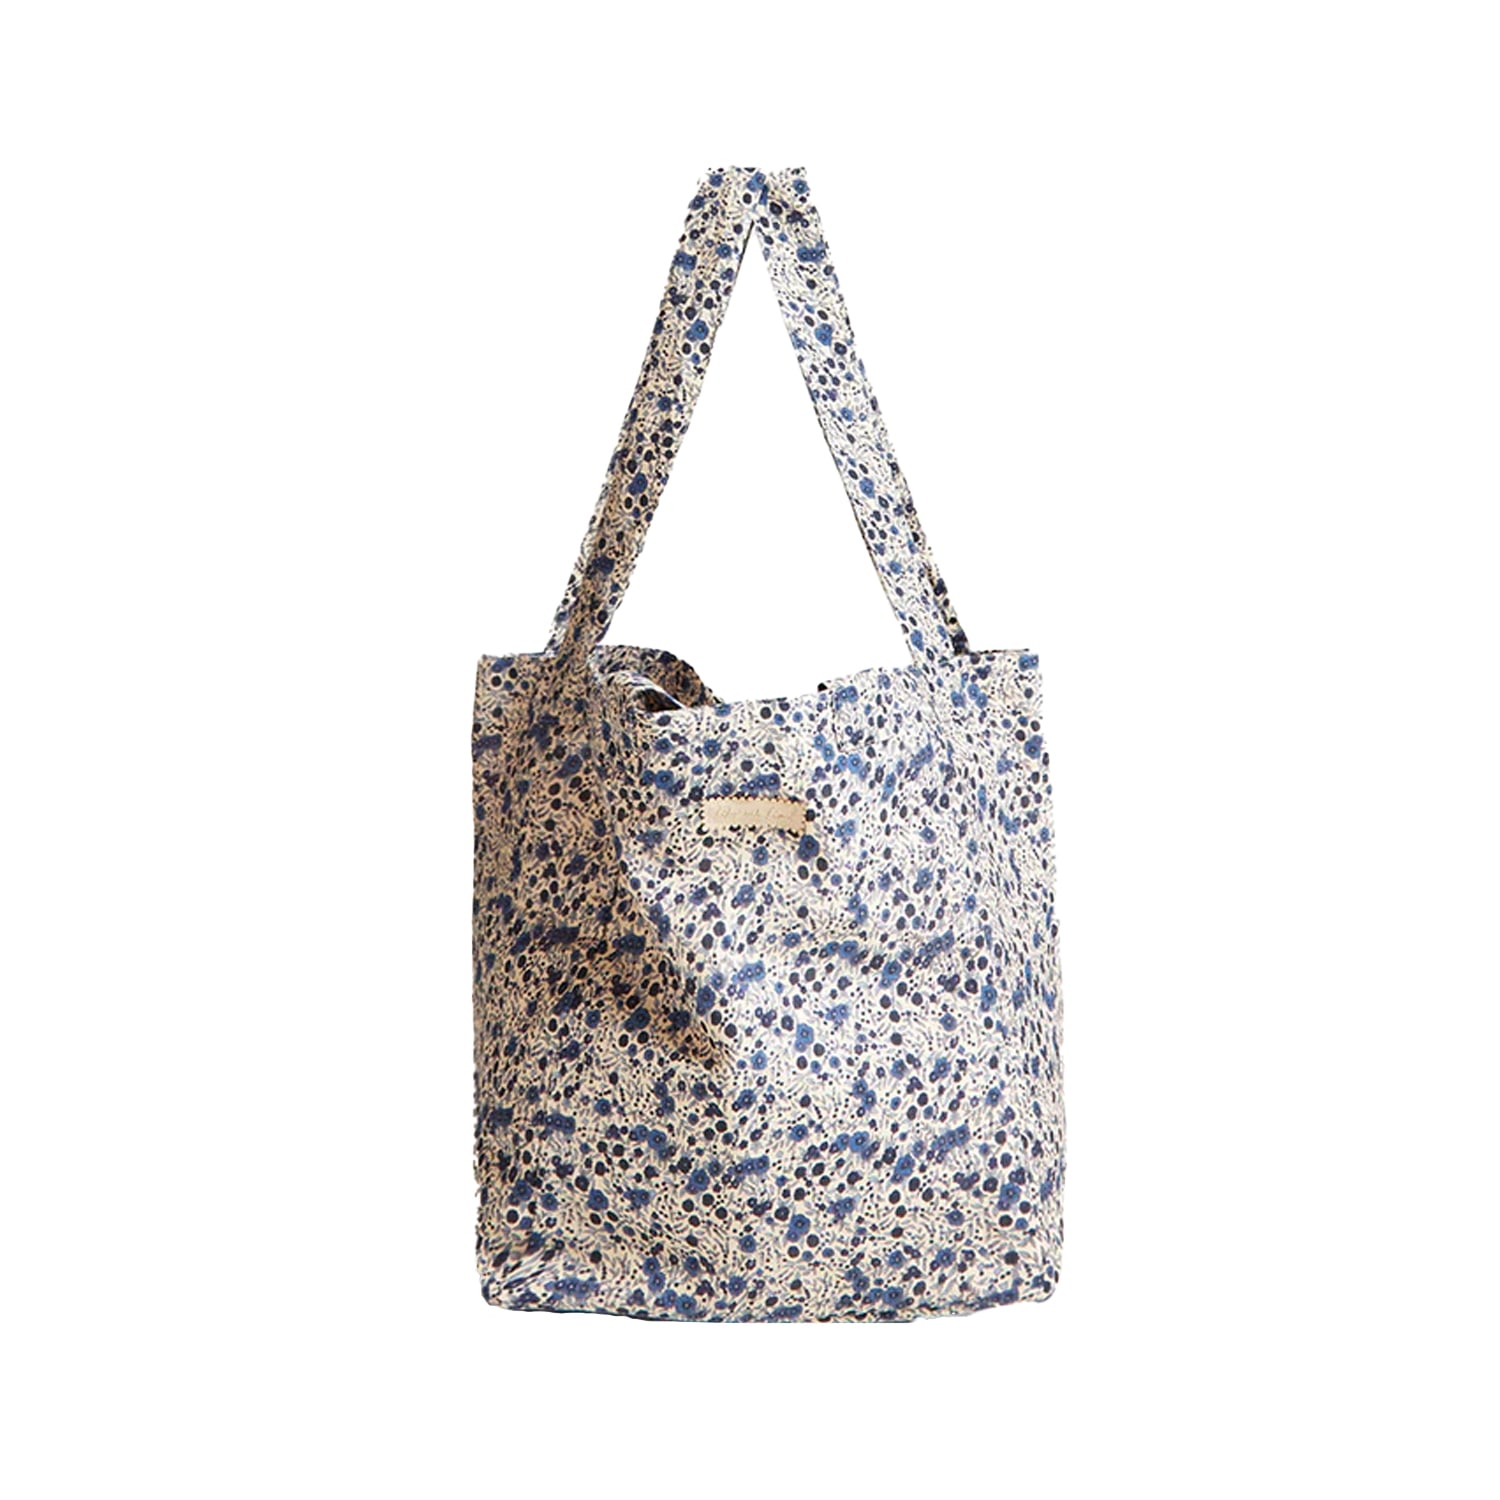 Women’s Large Tote Bag Blue Floral Aster Print One Size Lily and Lionel